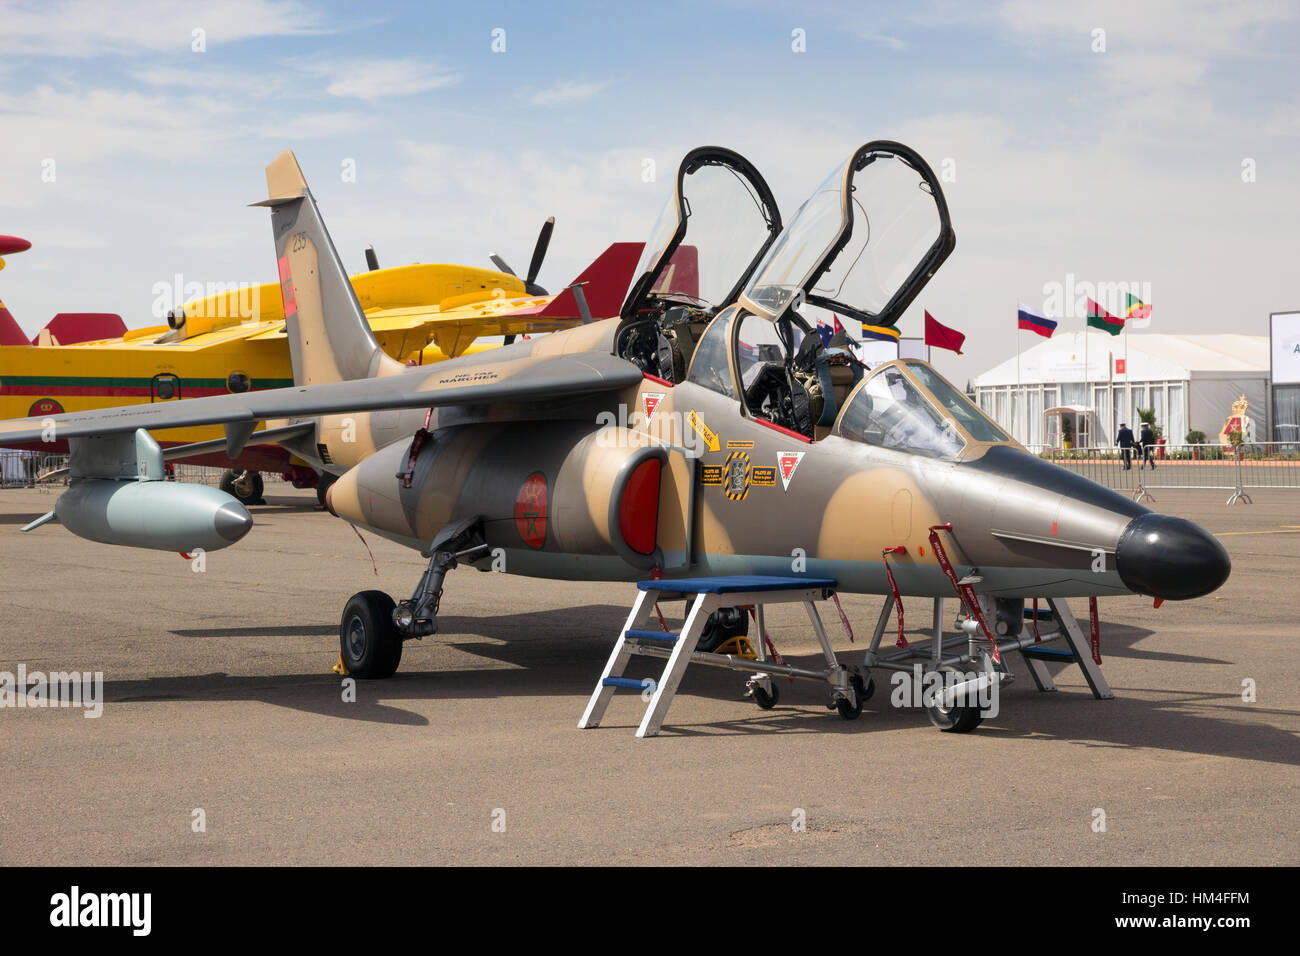 MARRAKECH, MOROCCO - APR 28, 2016: Moroccan Air Force Dassault Alpha Jet fighter jet on display at the Marrakech Air Show Stock Photo